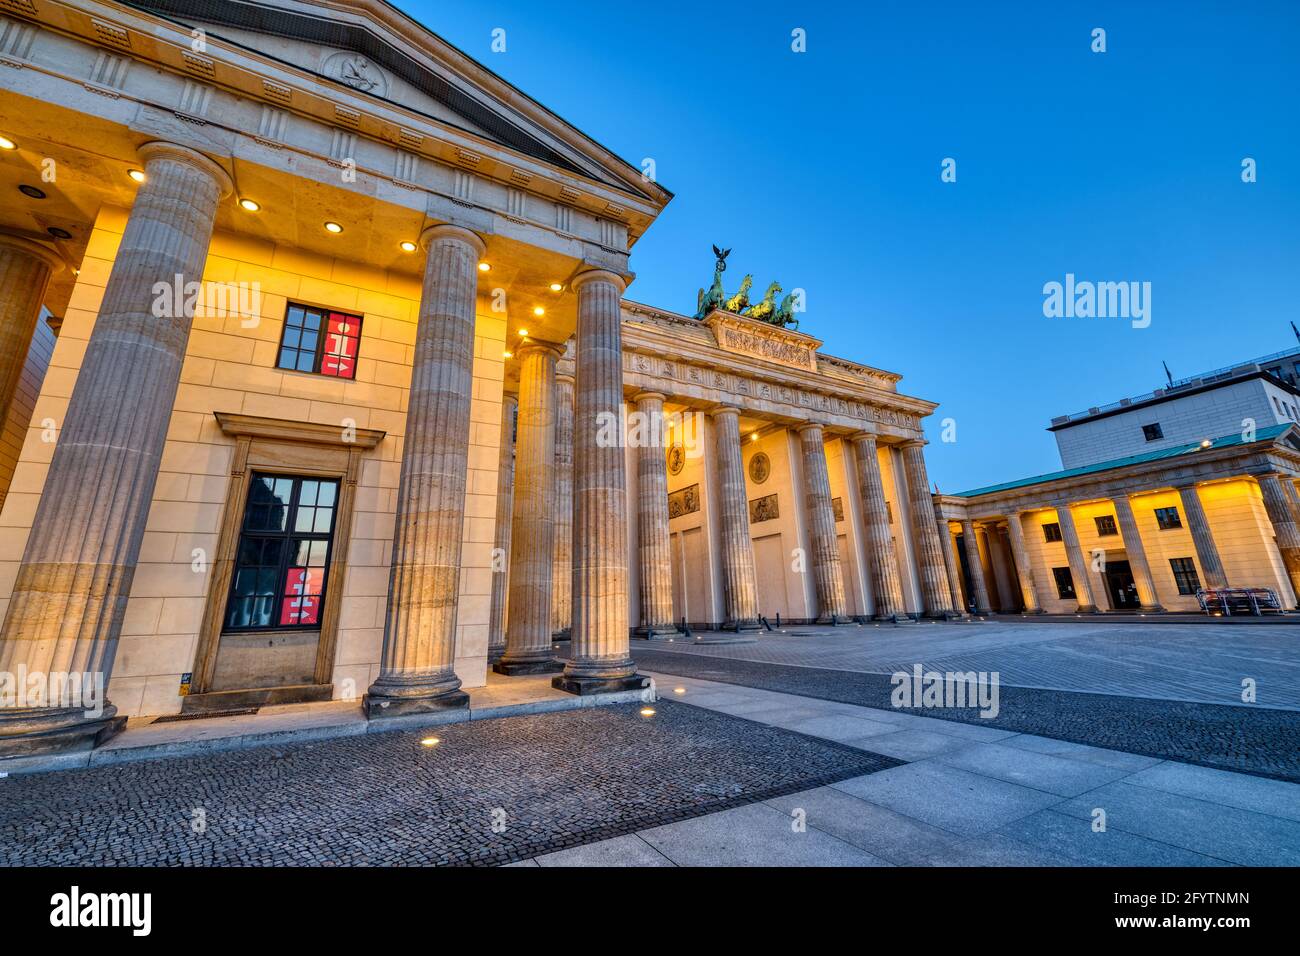 The famous Brandenburg Gate in Berlin at dawn with no people Stock Photo